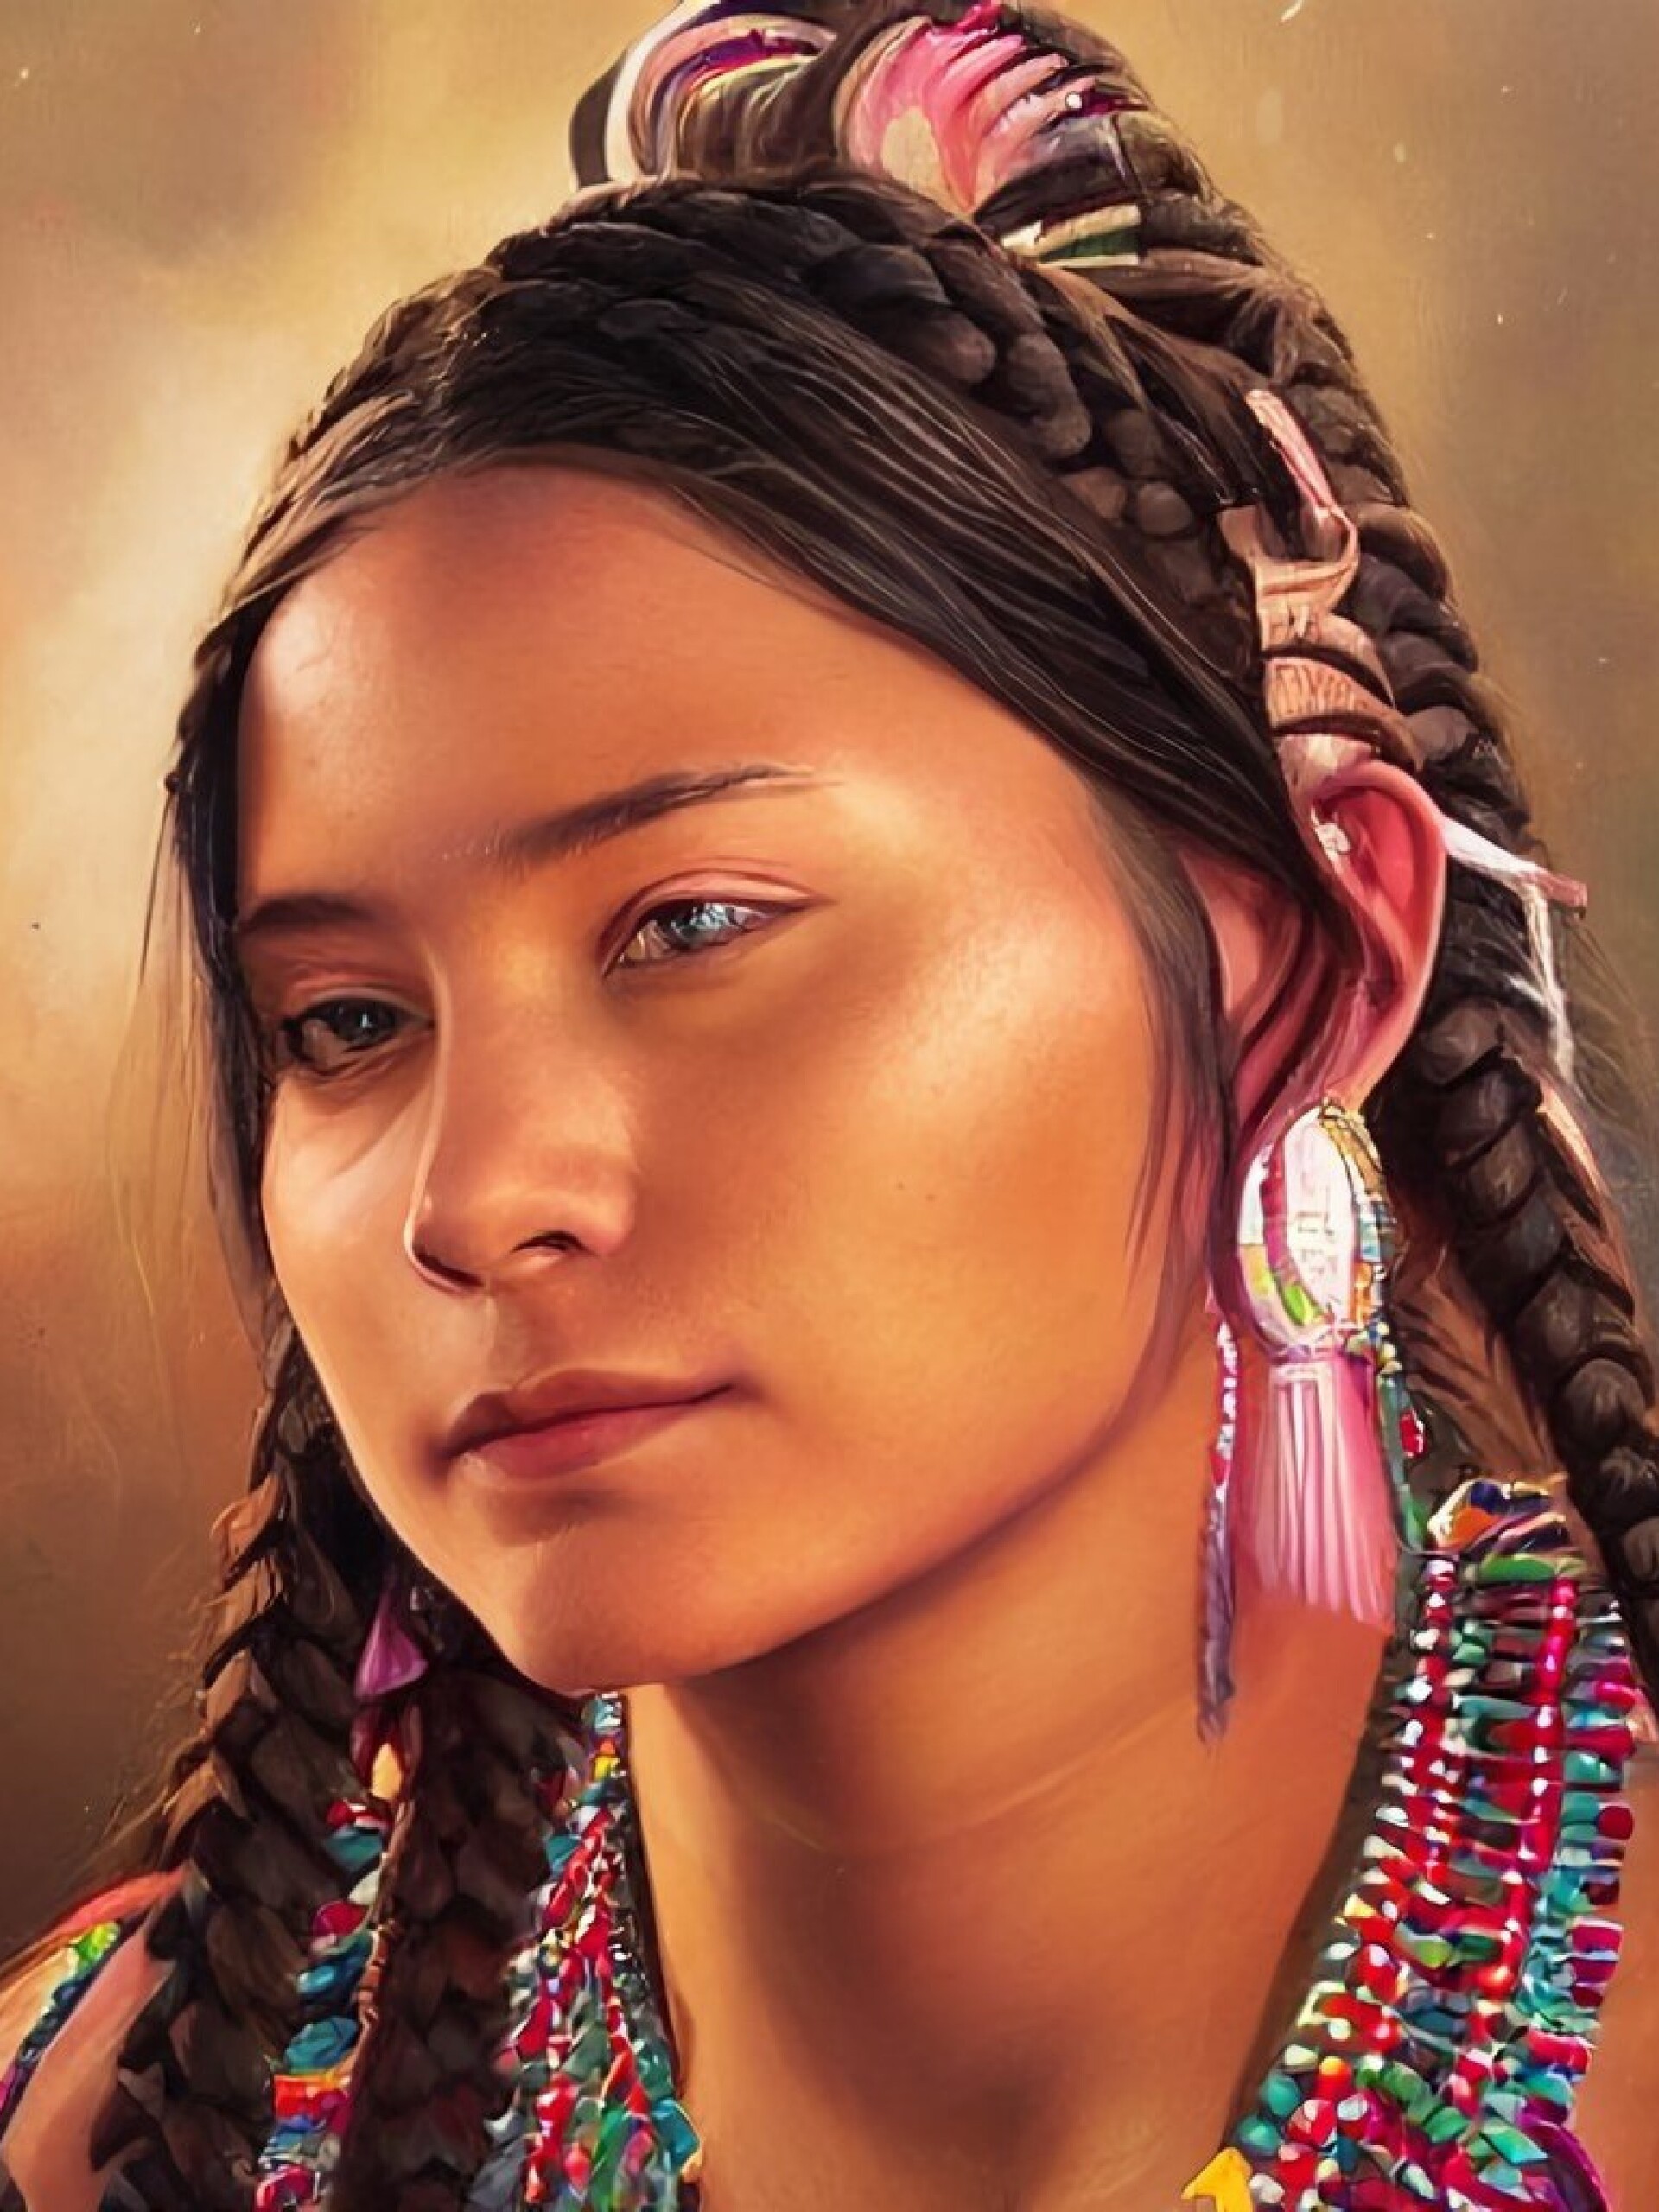 Native American Indian Hairstyles (Braids, Whorls, Scalplocks, Roached  'Mohawk' Hair, And Other Styles)